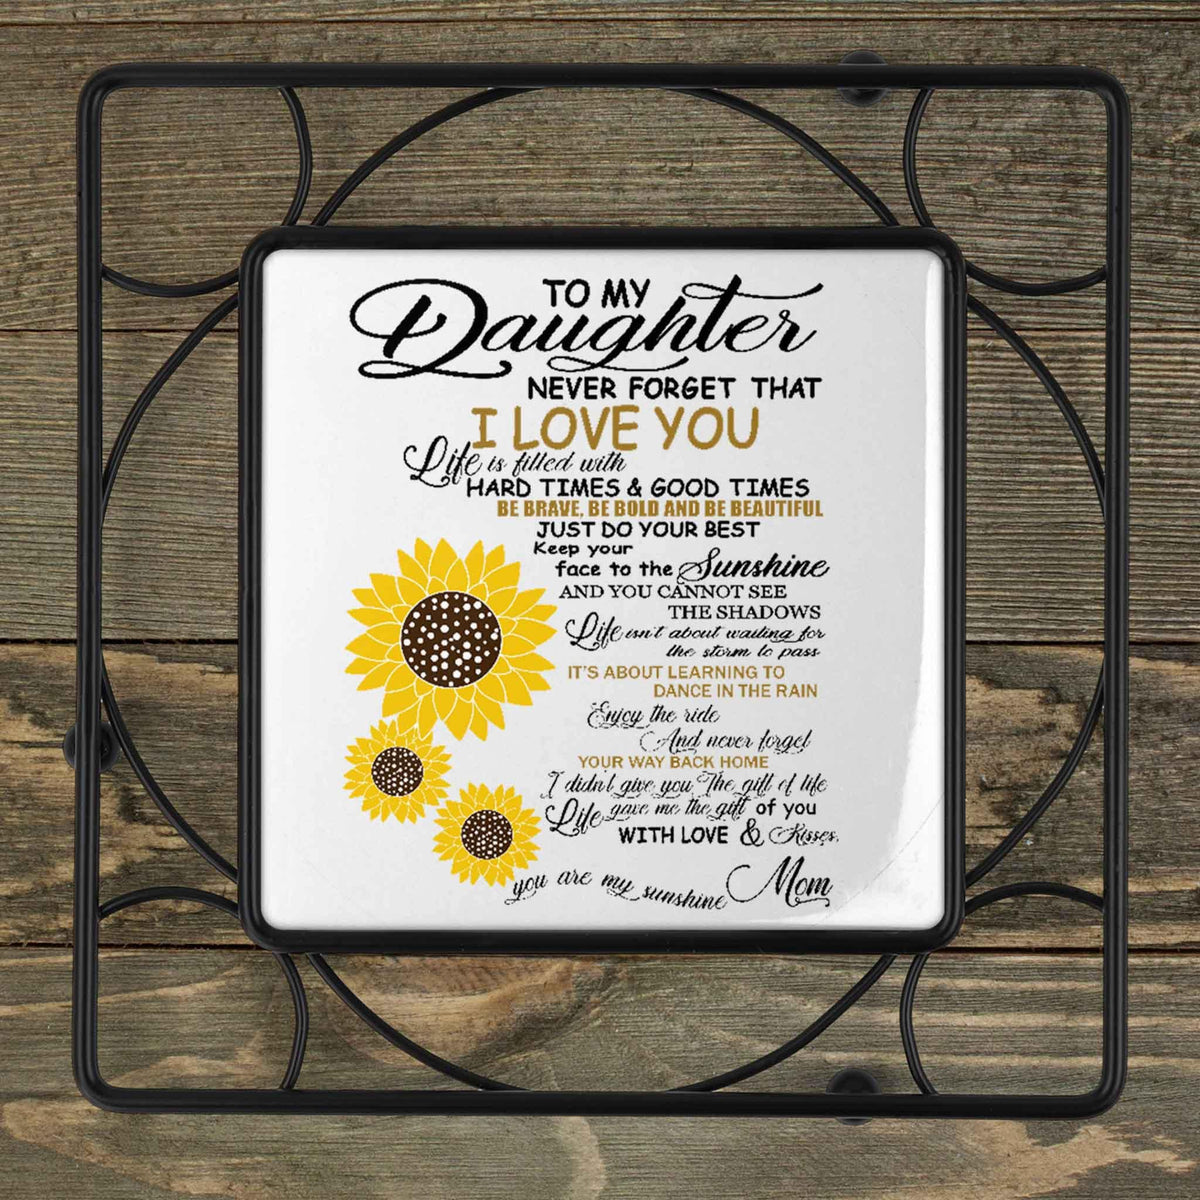 Personalized Iron Trivet | Custom Kitchen Gifts | To My Daughter